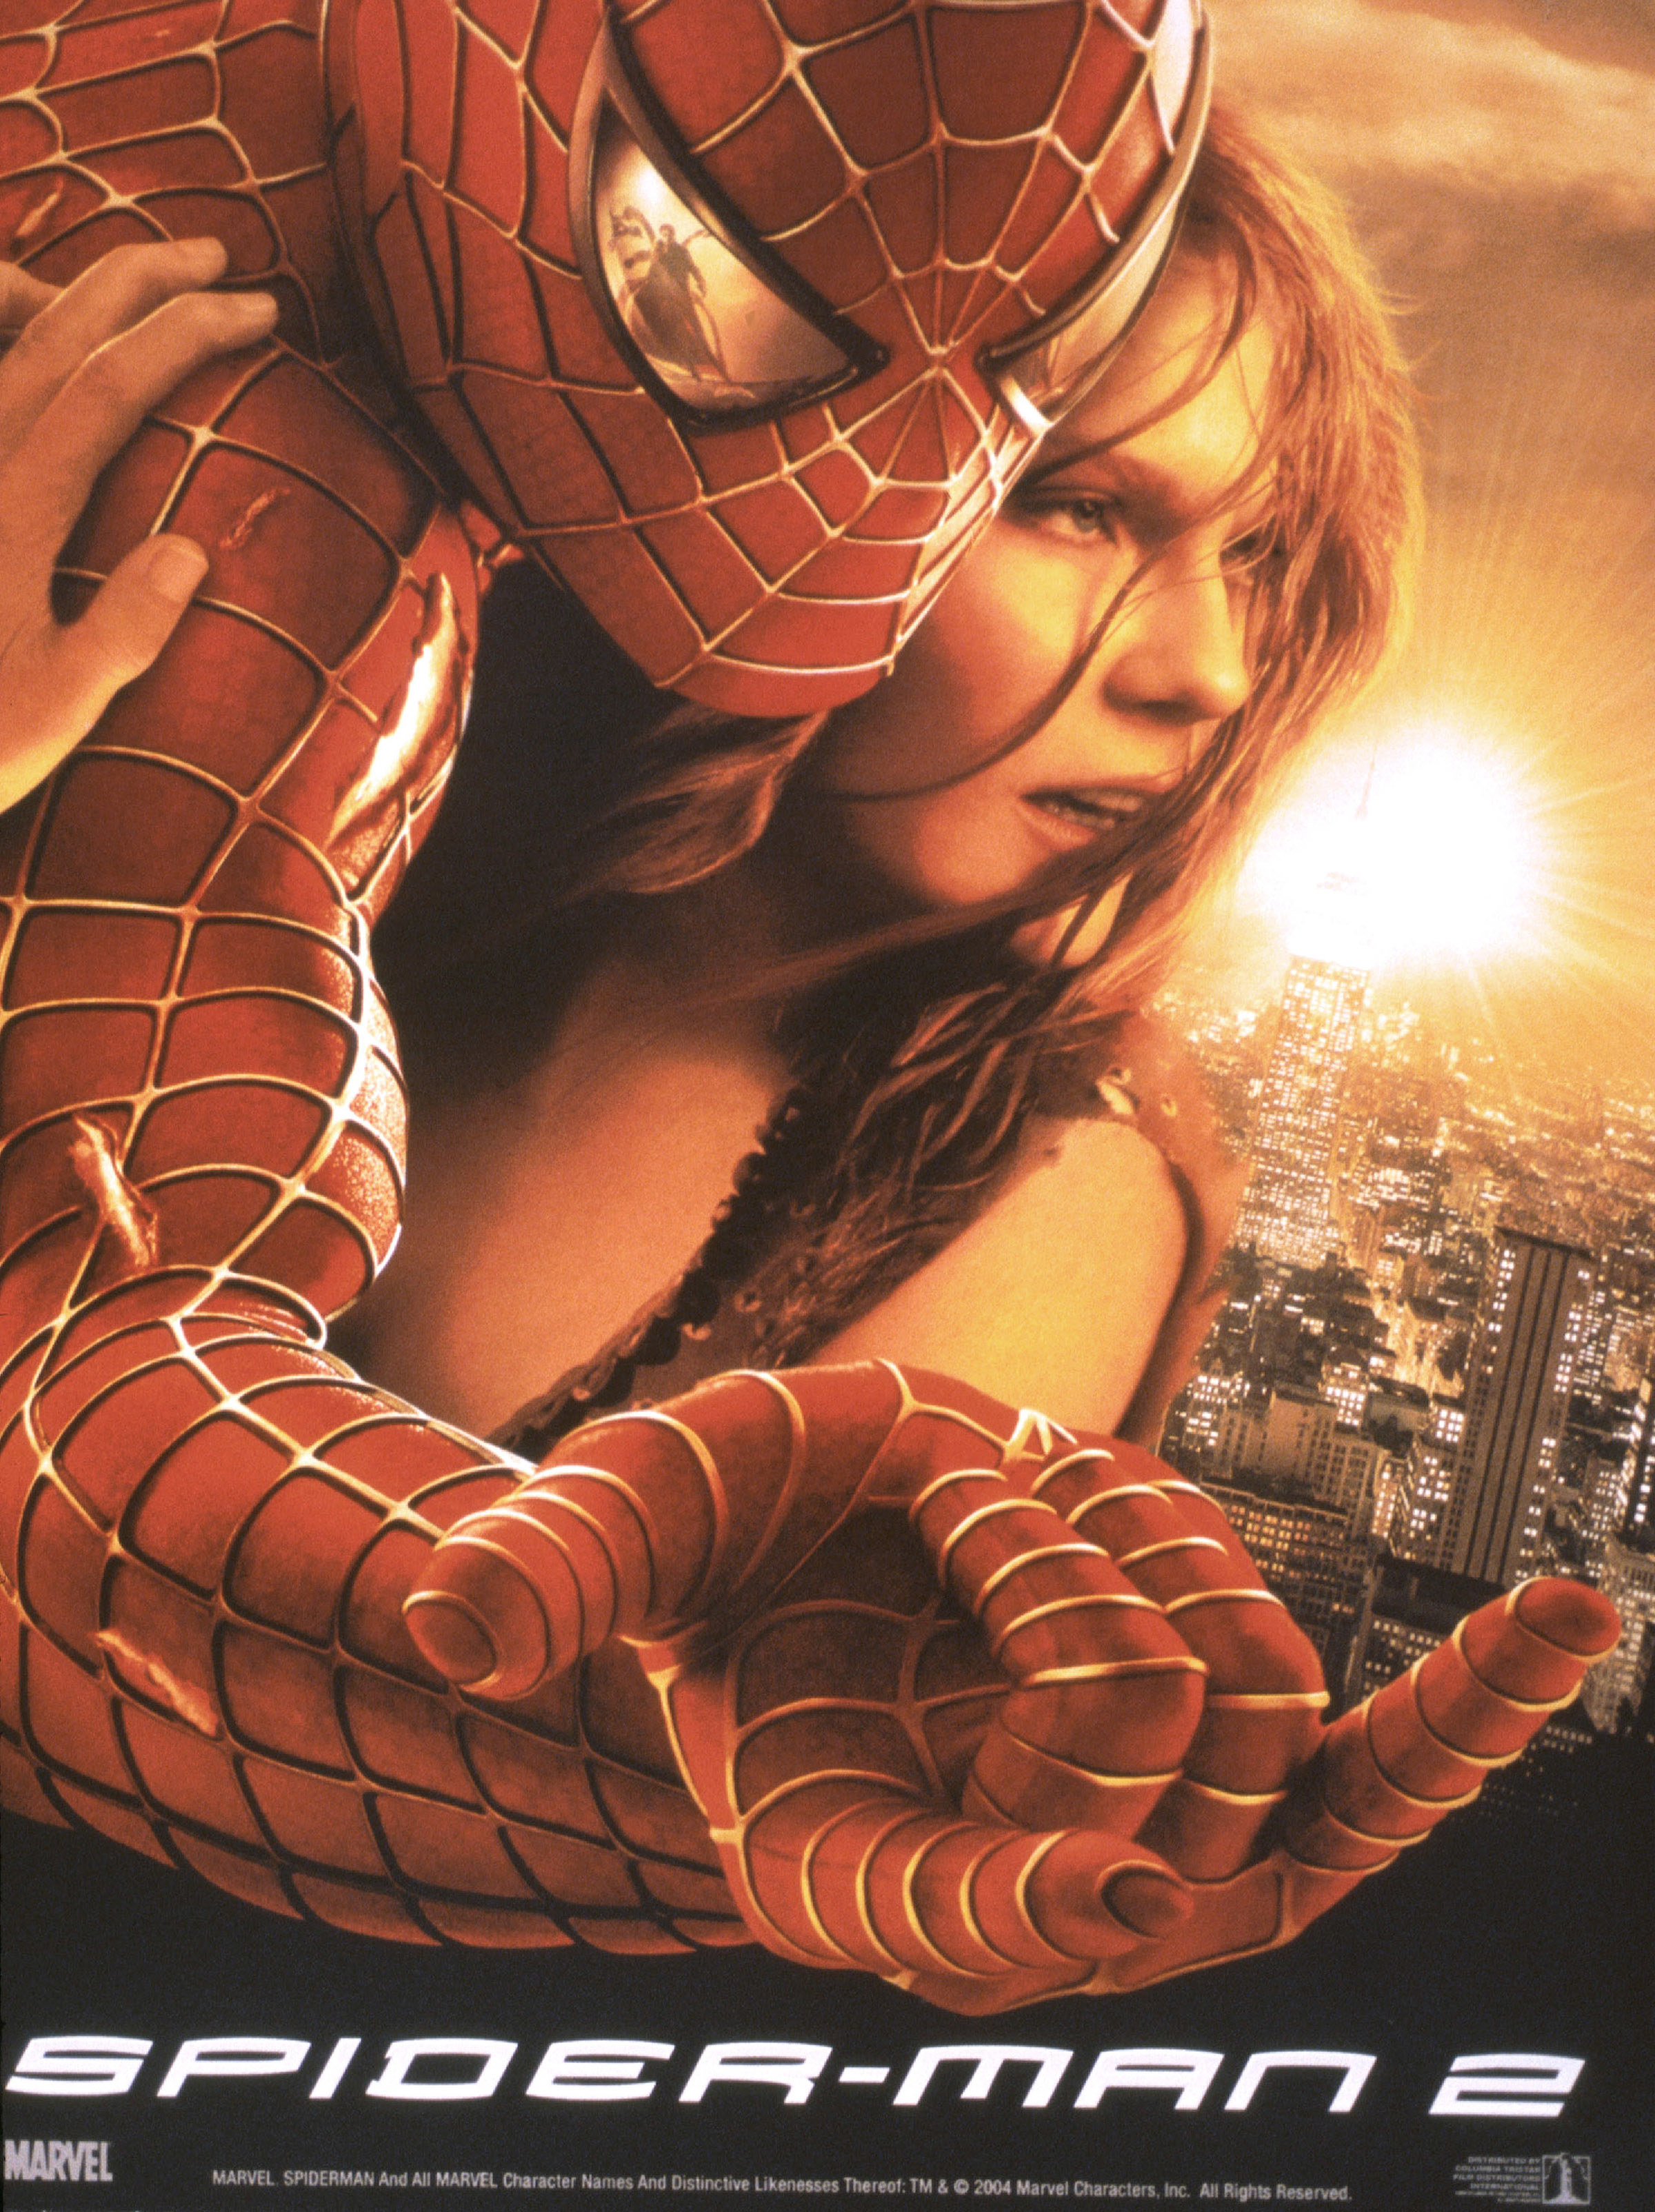 The poster for Spider-Man 2, with Spidey embracing Mary Jane